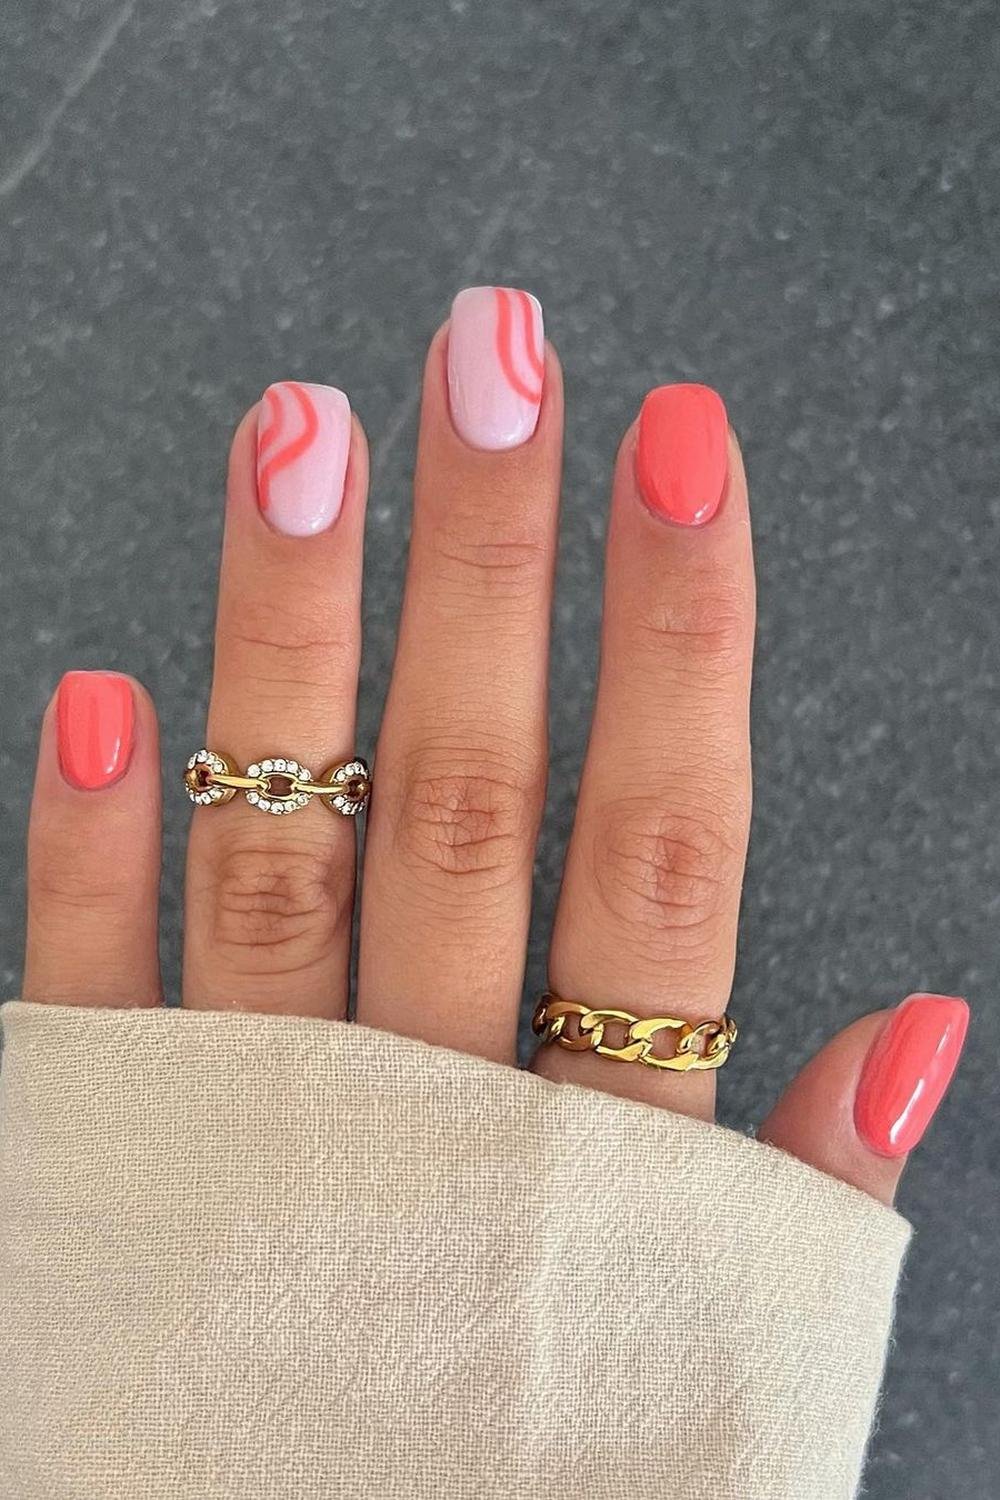 55 - Picture of Squoval Nails